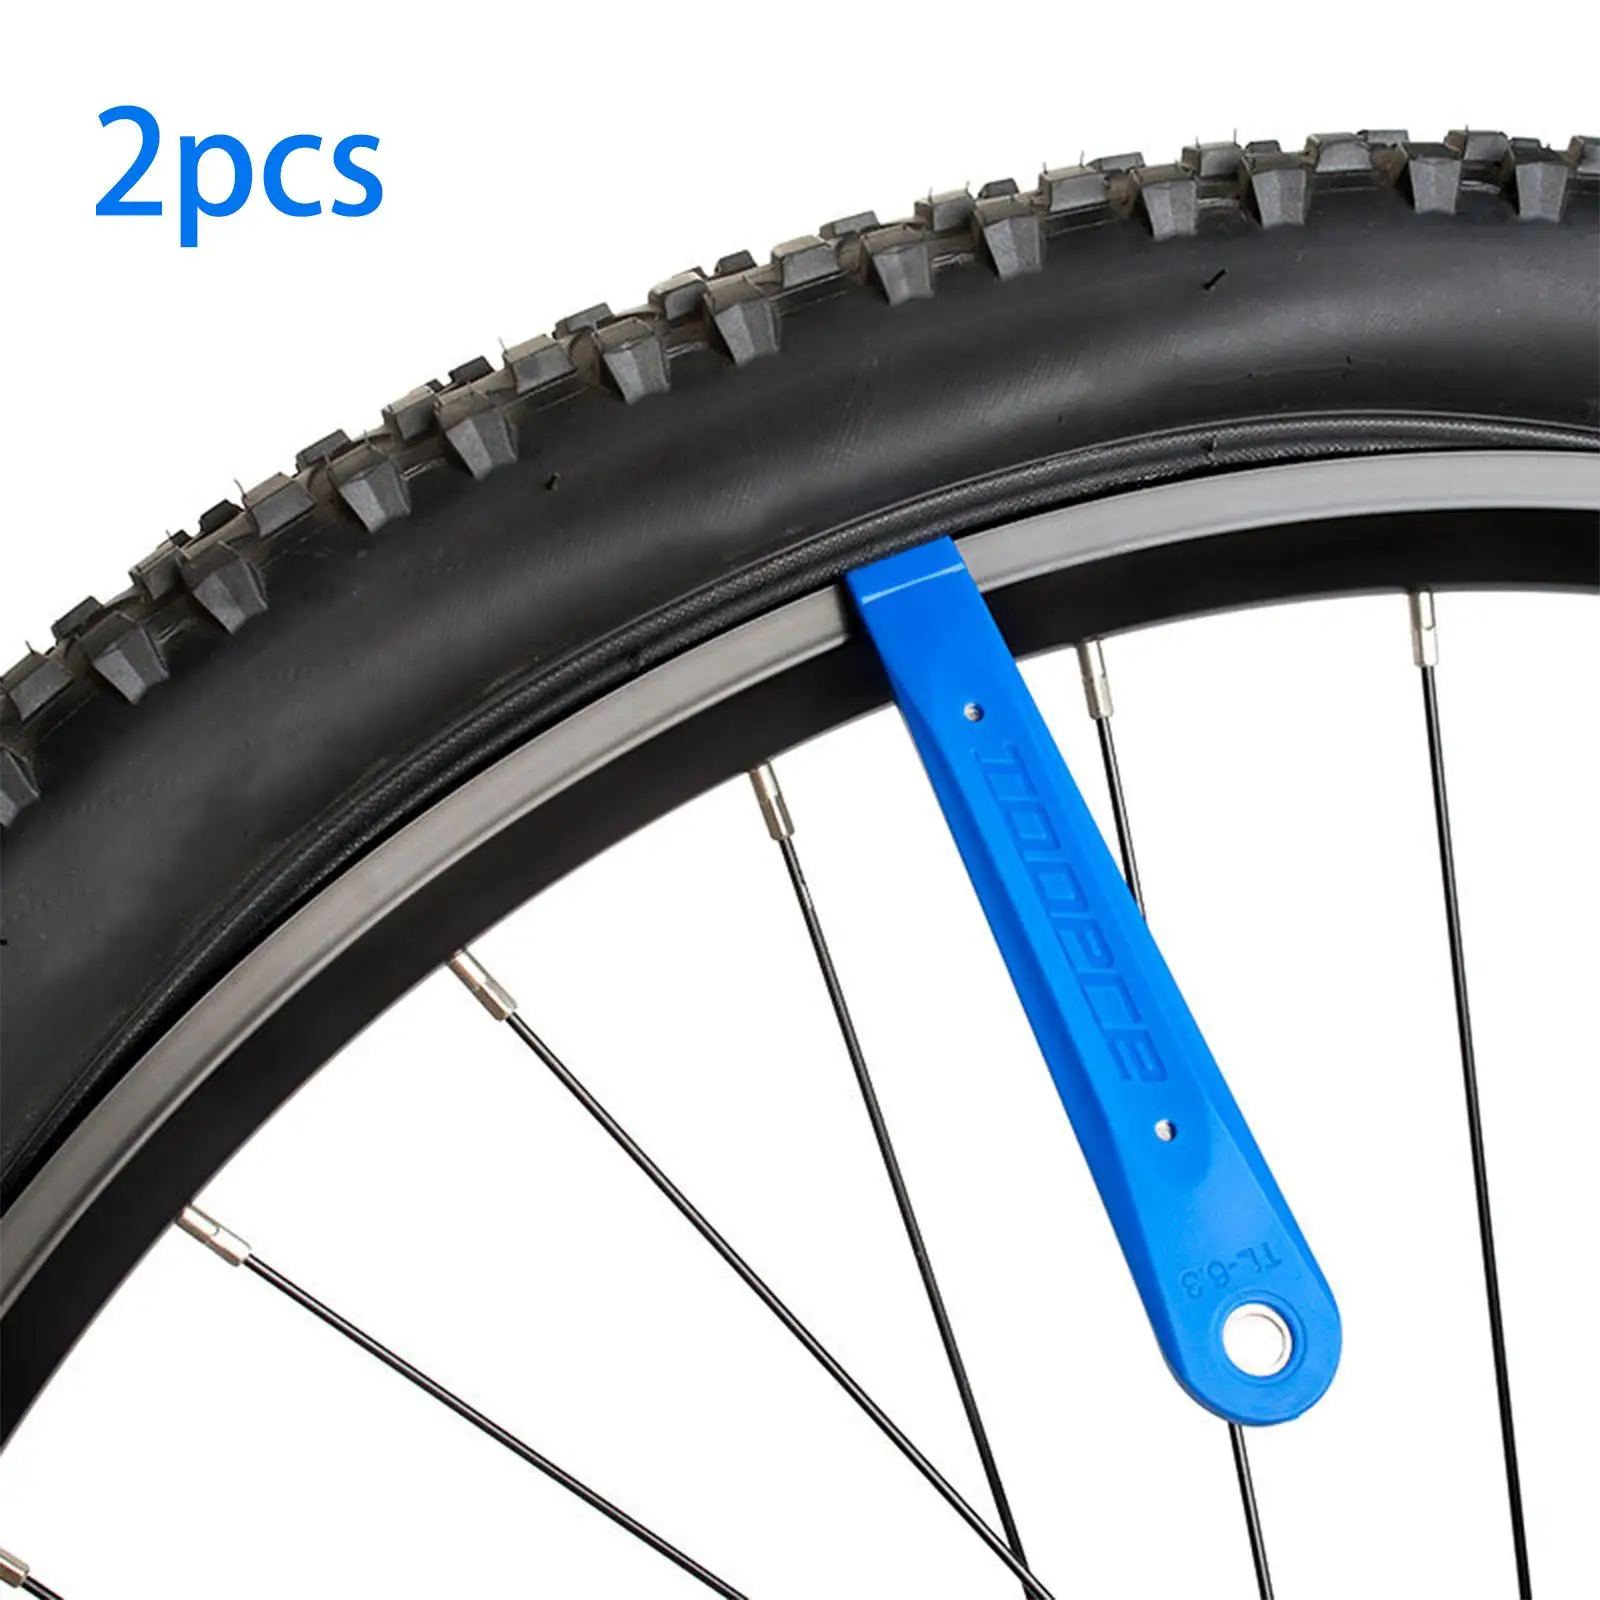 2Pcs Portable Bike Tire Lever Repair Tool Removal Changing Tool Stainless Steel Bicycle Tire Removal Tools for MTB Mountain Bike